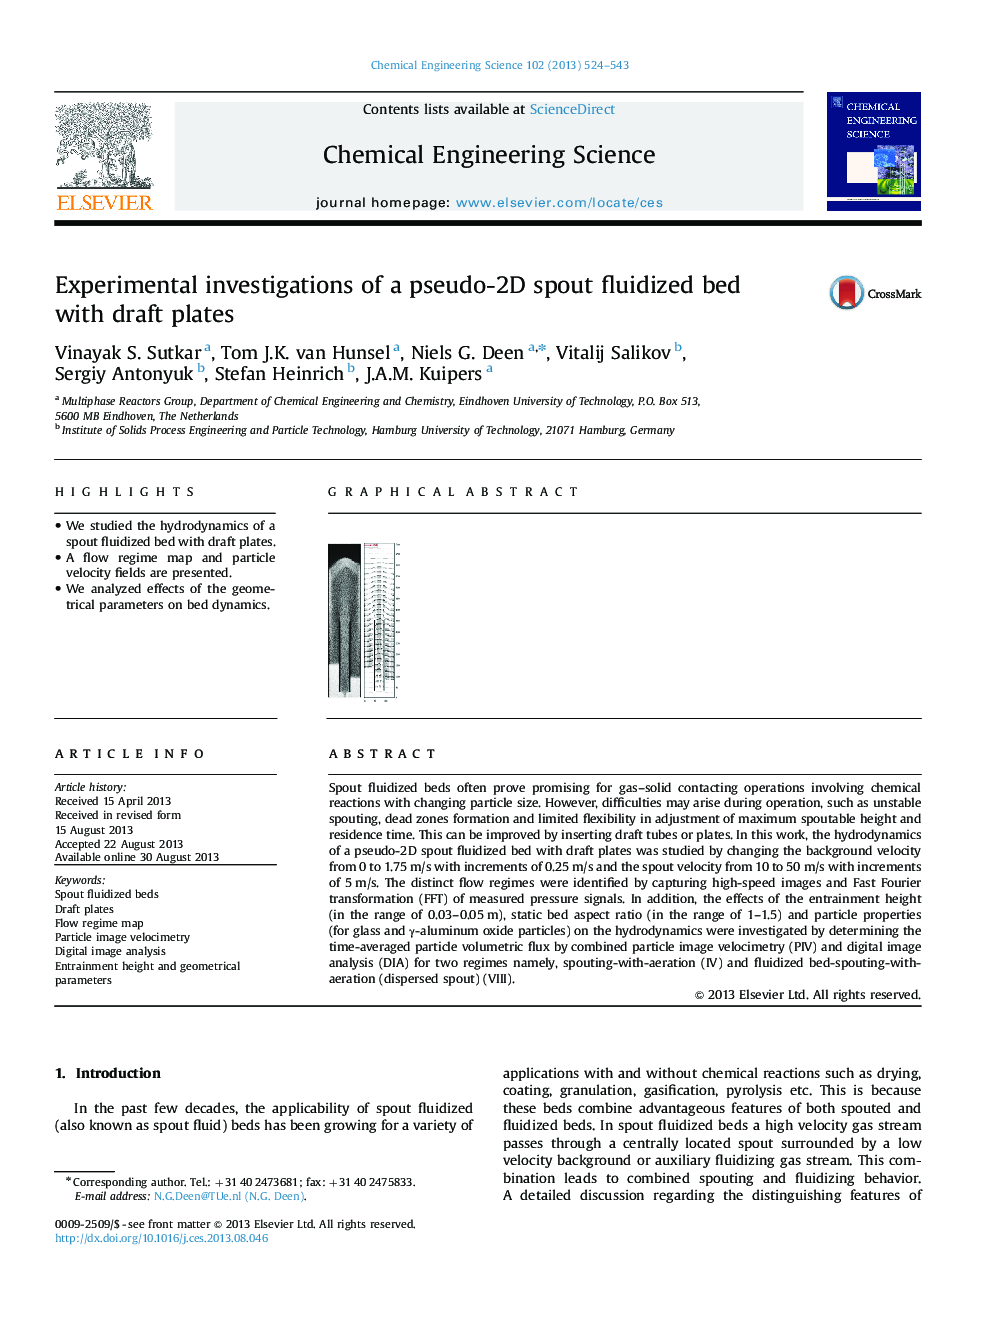 Experimental investigations of a pseudo-2D spout fluidized bed with draft plates